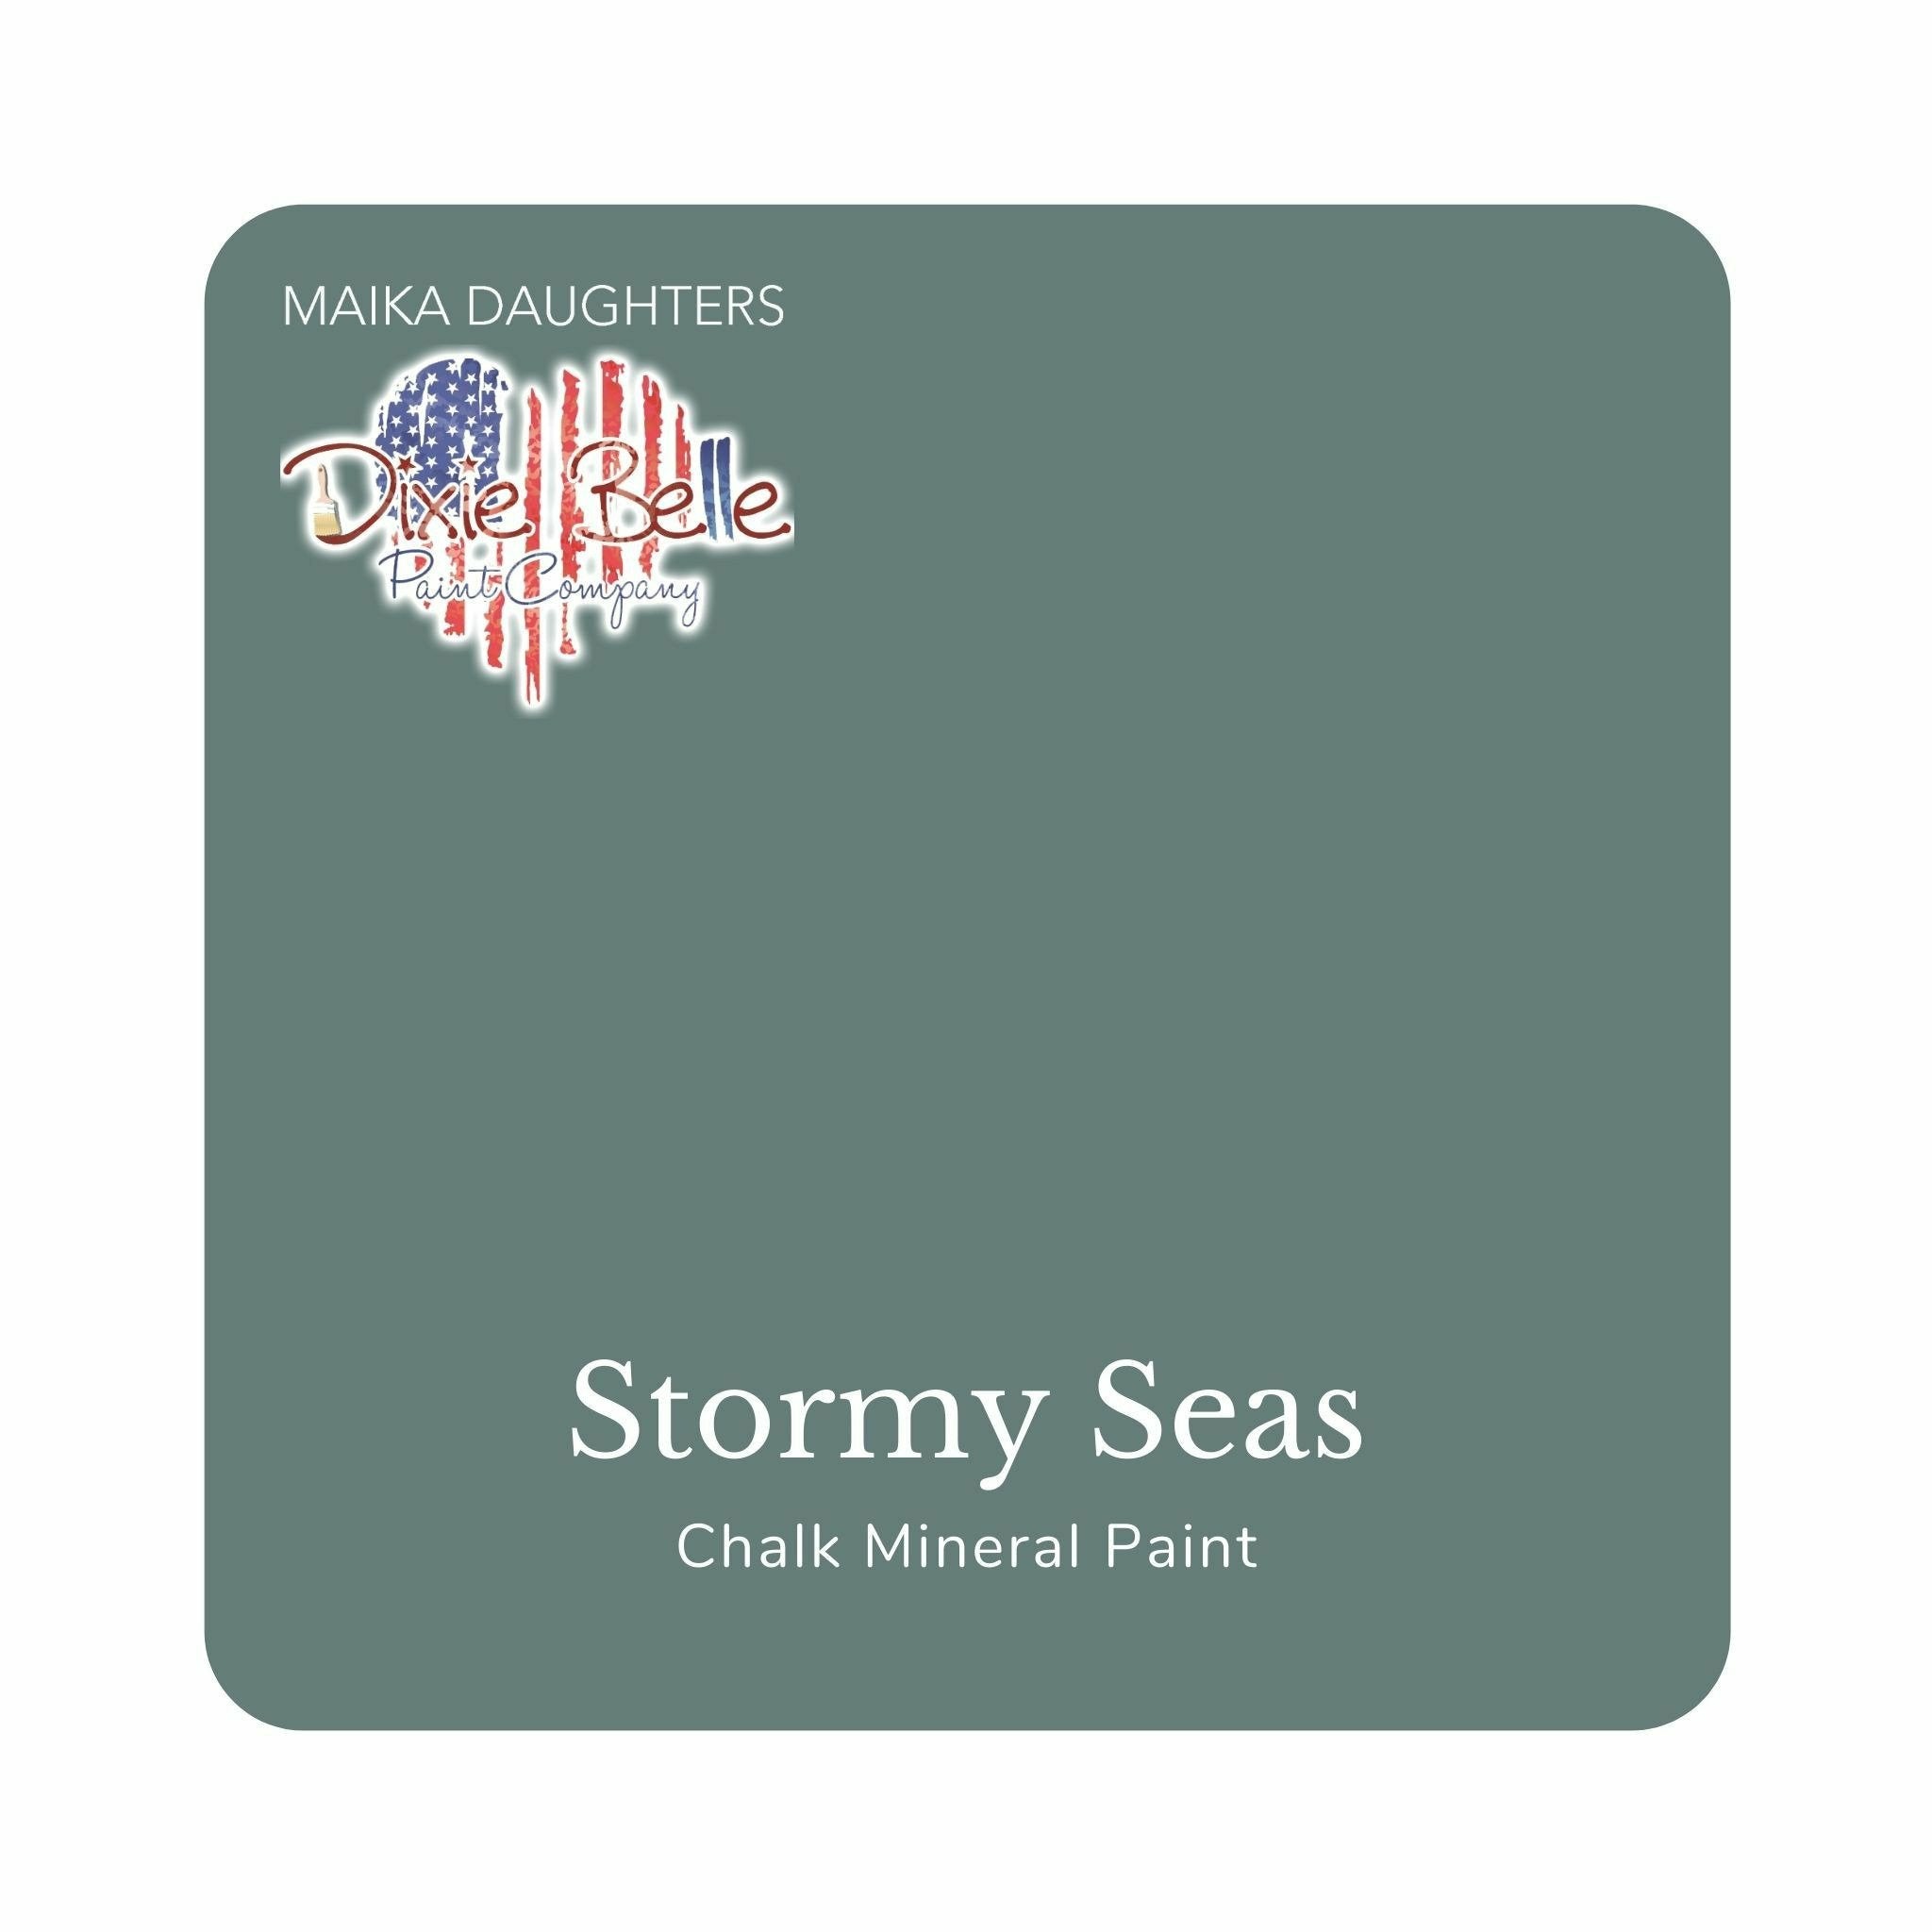 A square swatch card of Dixie Belle Paint Company’s Stormy Seas Chalk Mineral Paint is against a white background. This color is a light slate gray with blue undertones.